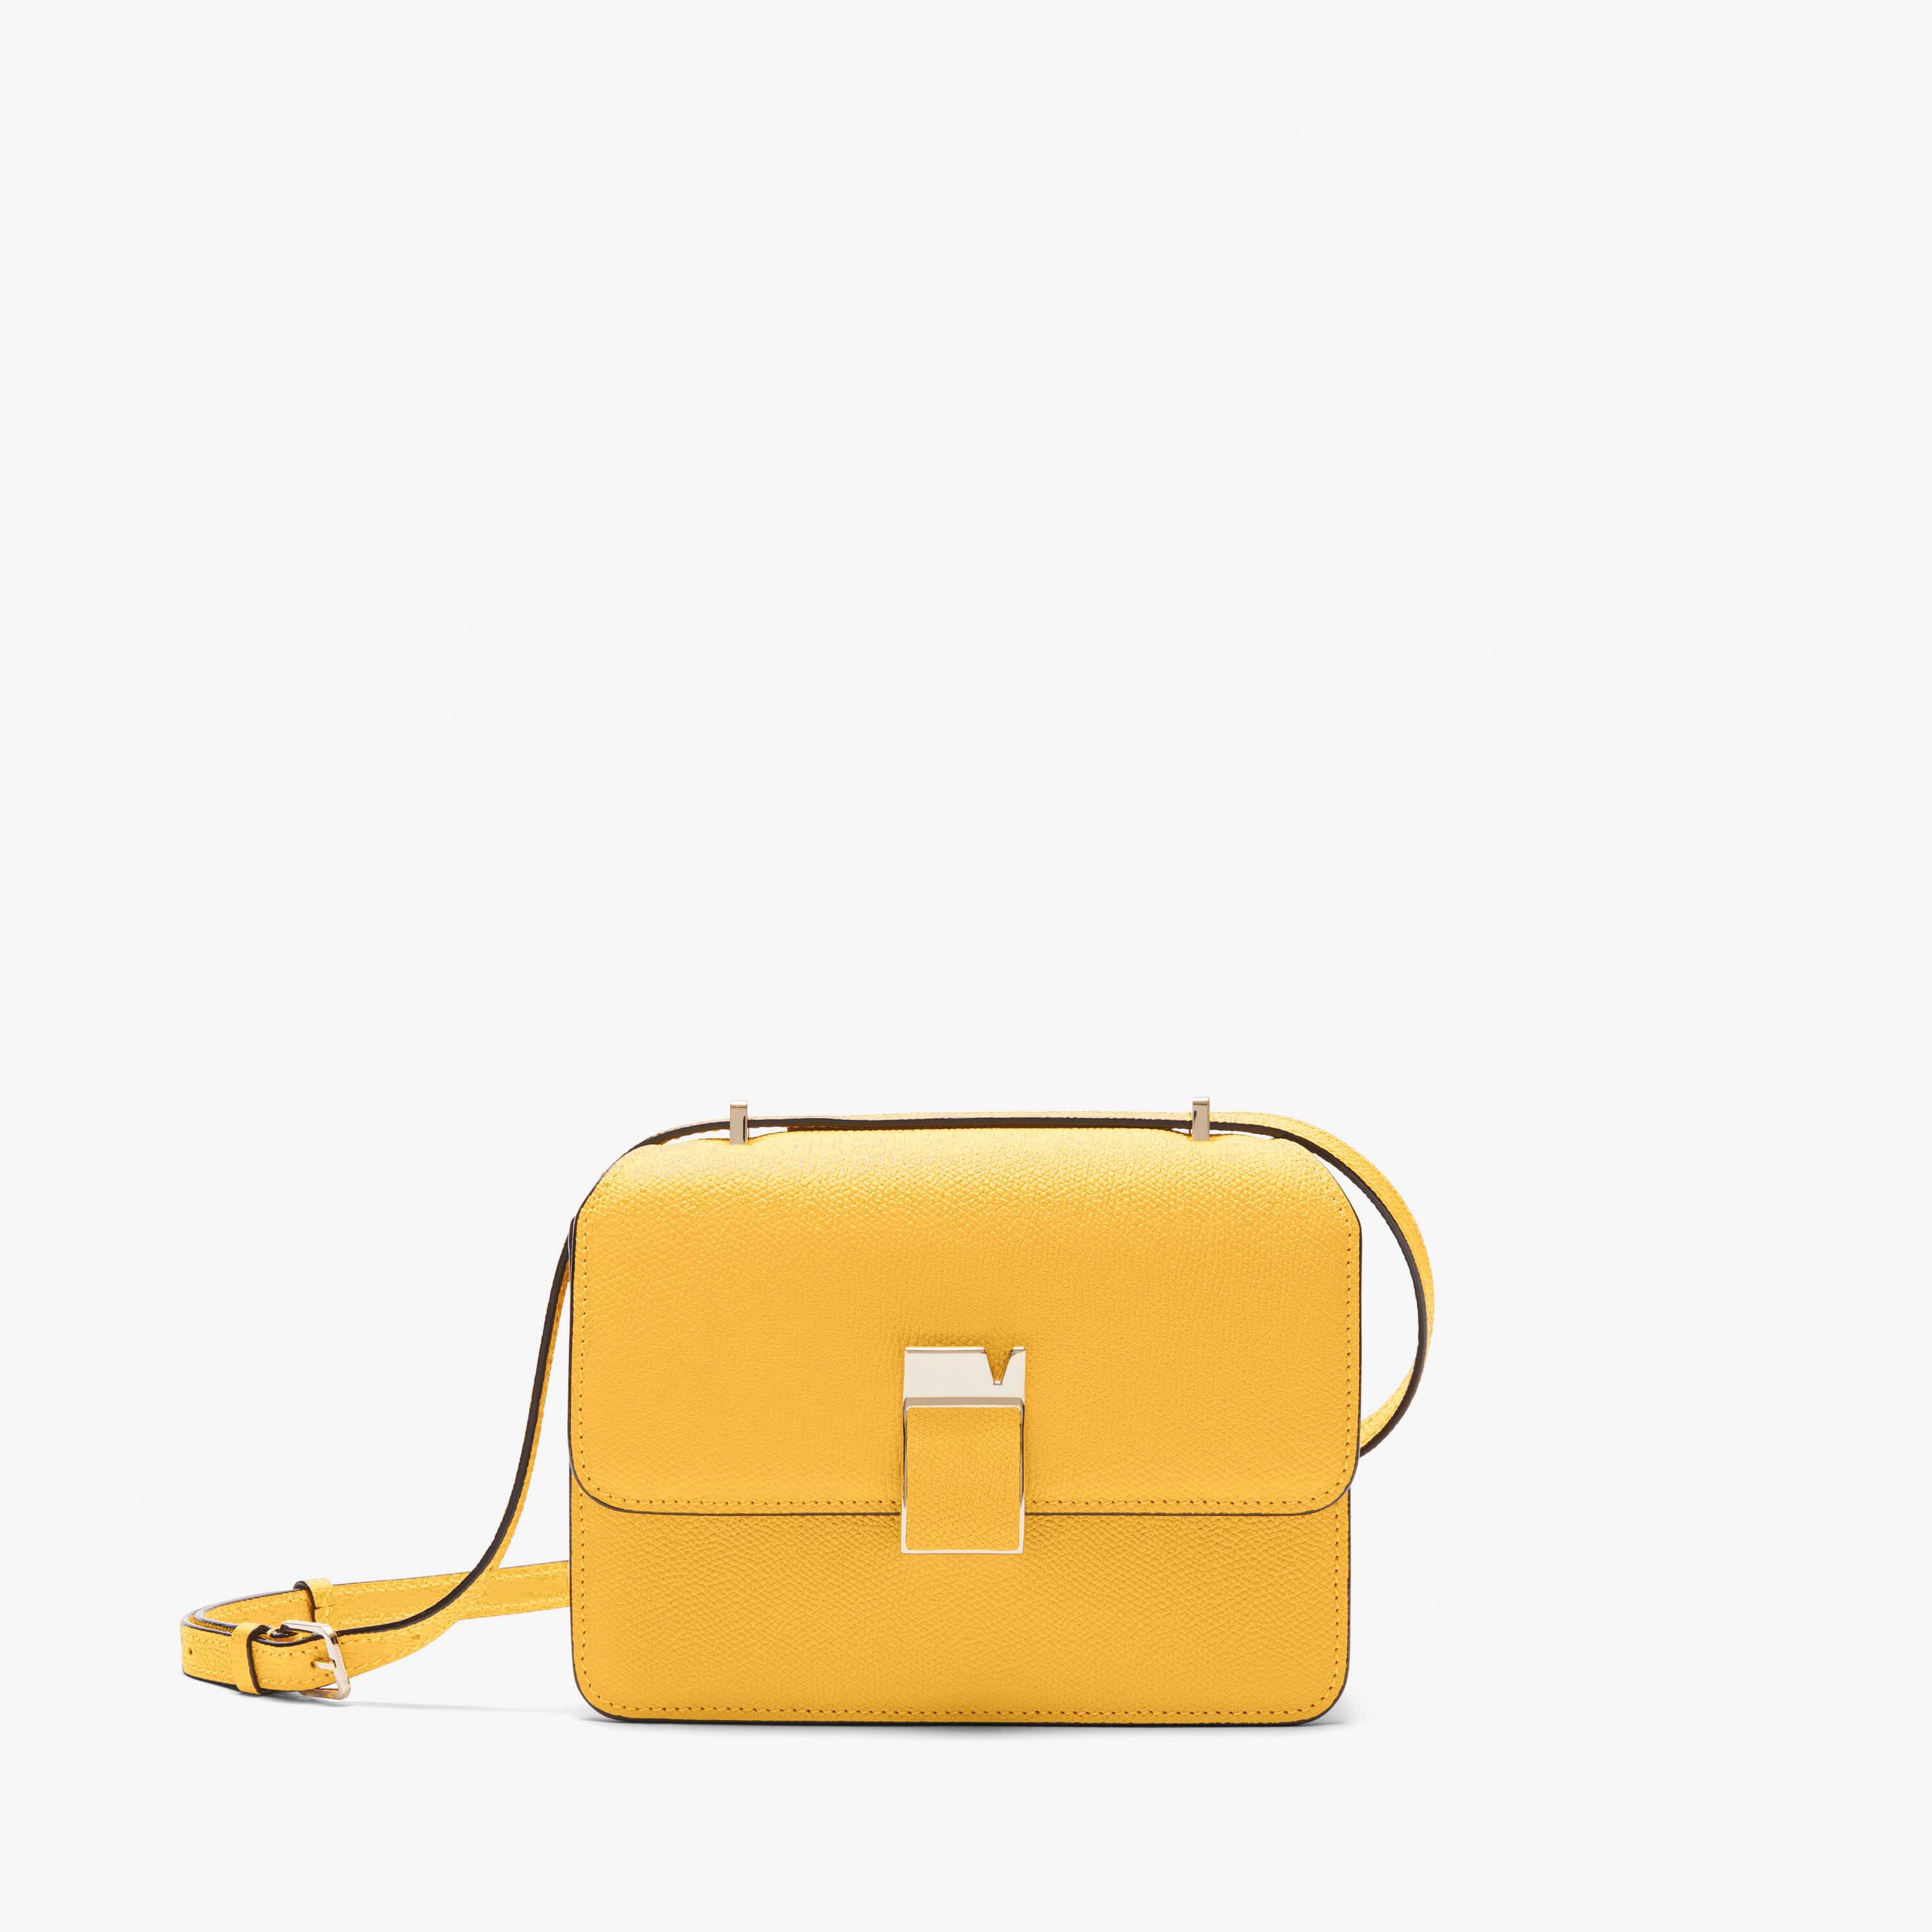 New in: Leather handbags and accessories | Valextra